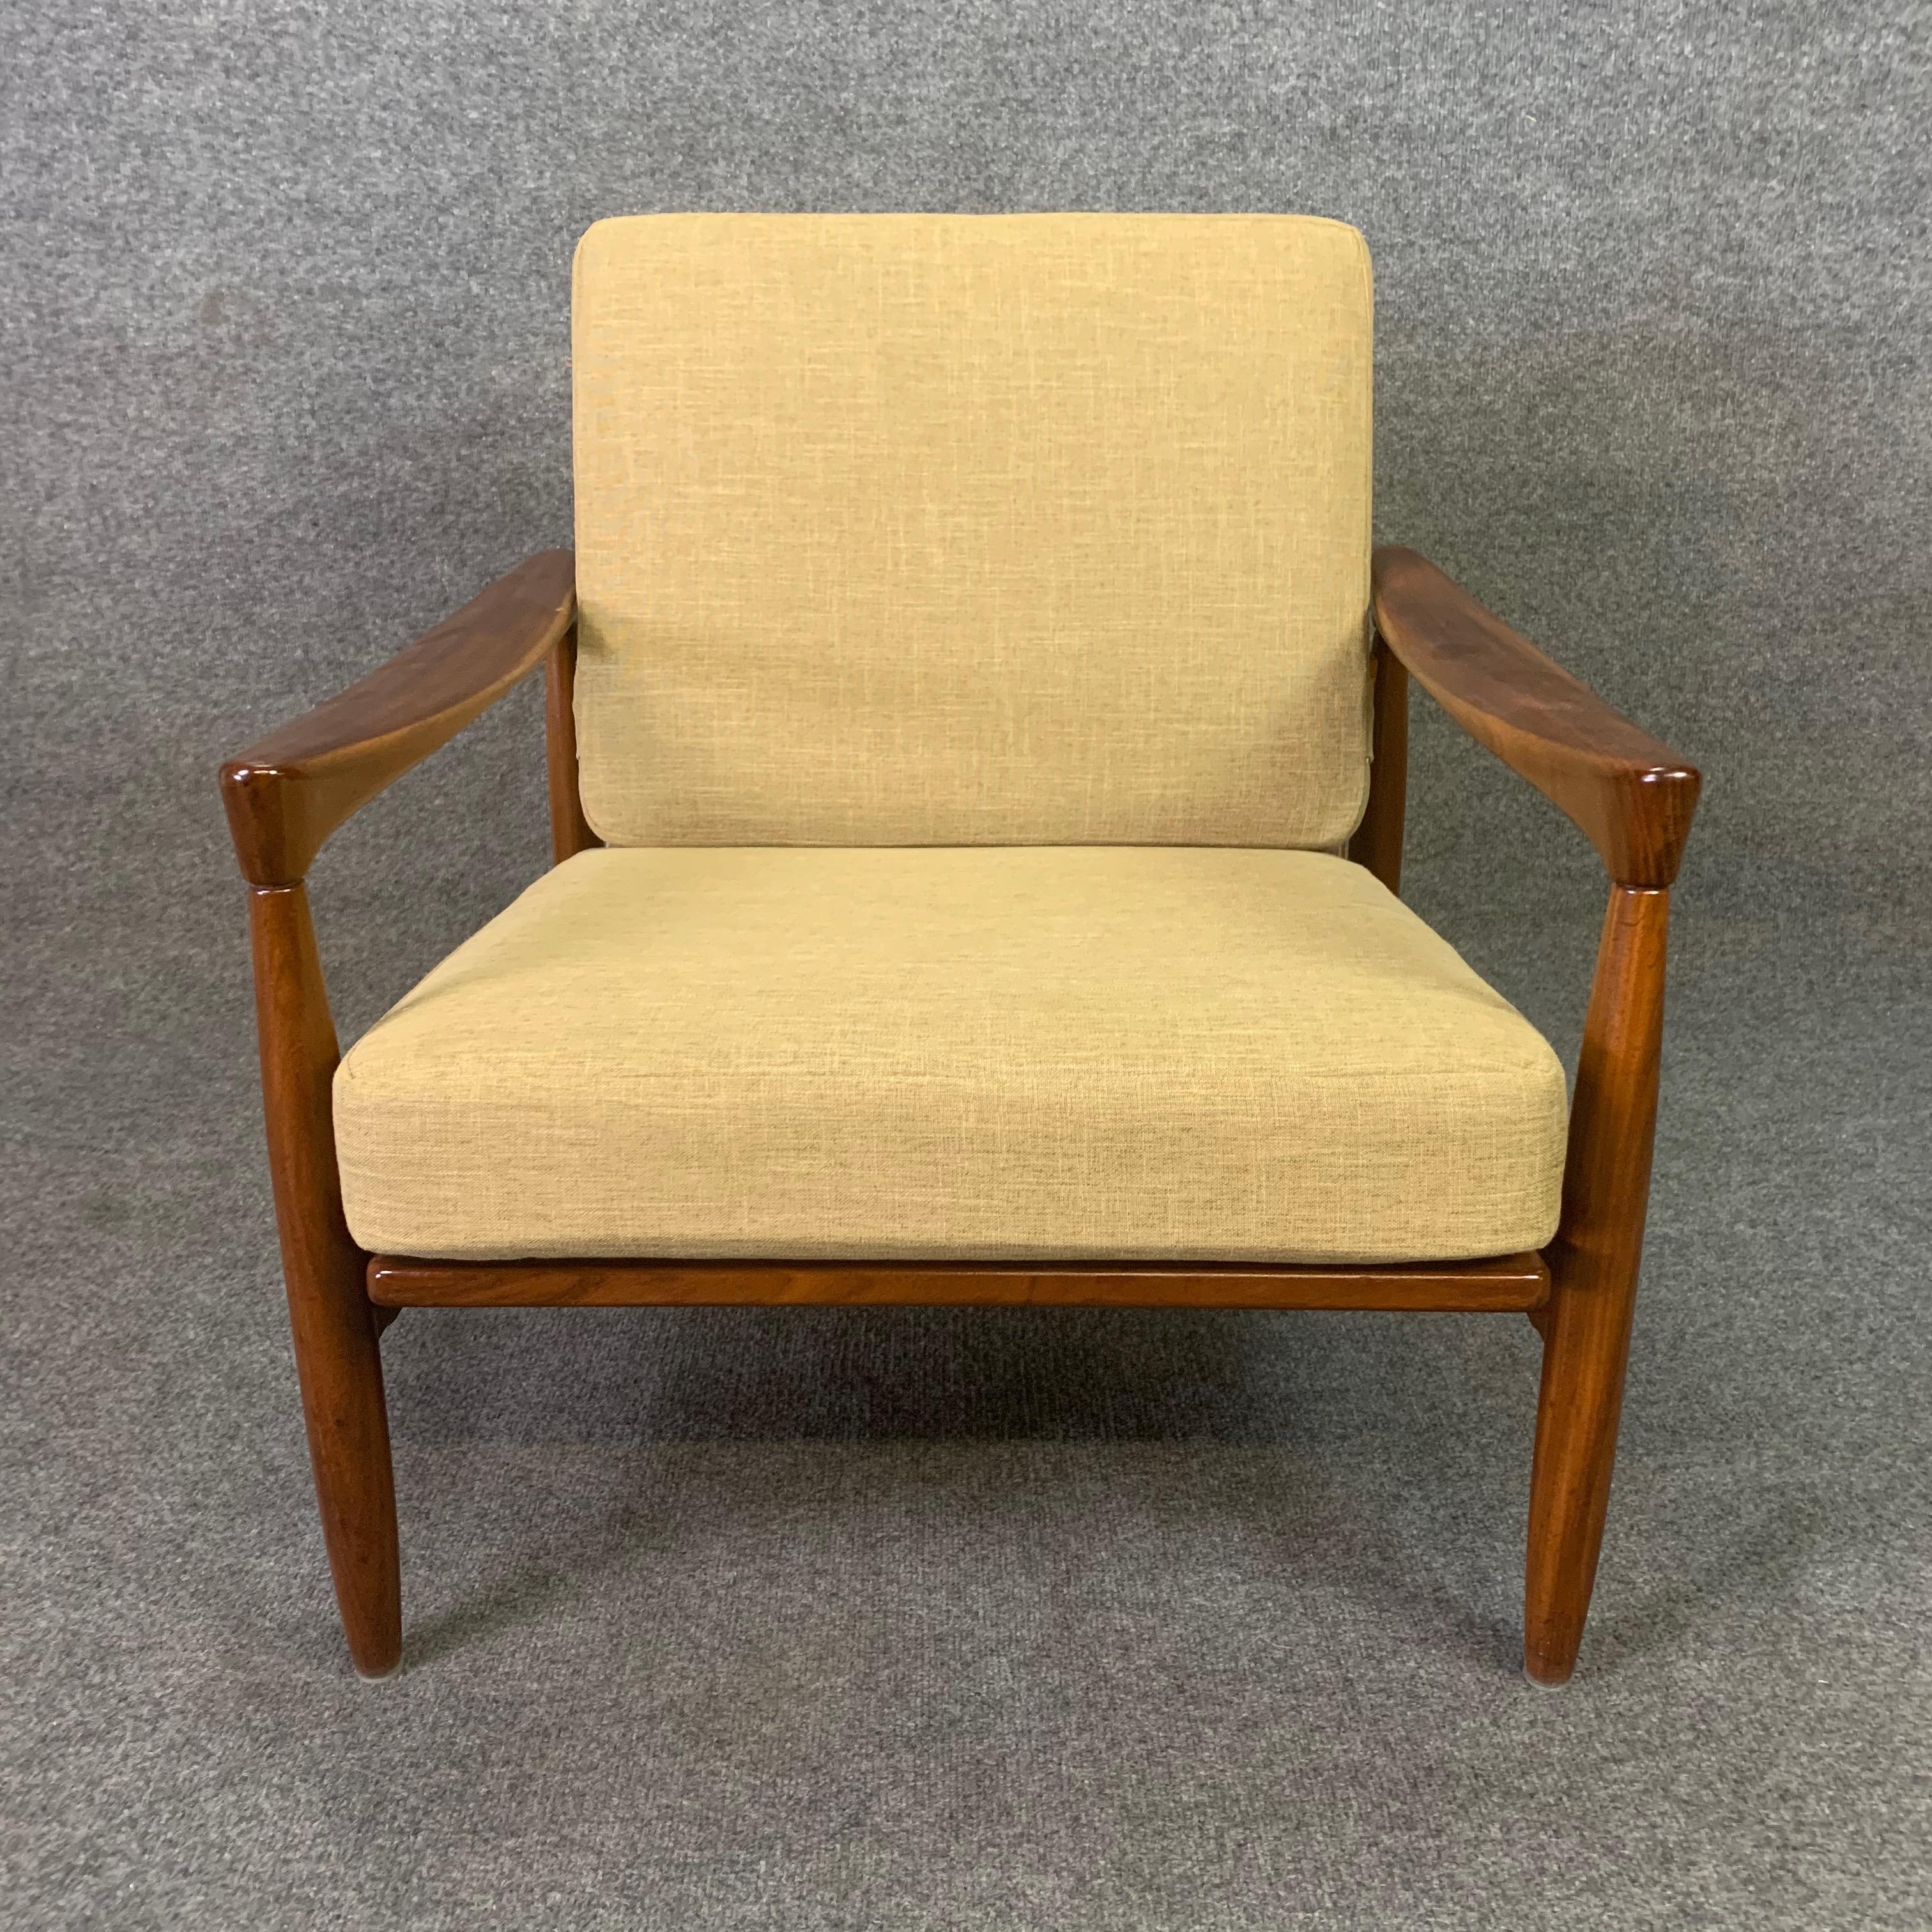 Mid-20th Century Here is a Beautiful Modern Lounge Chair Model 